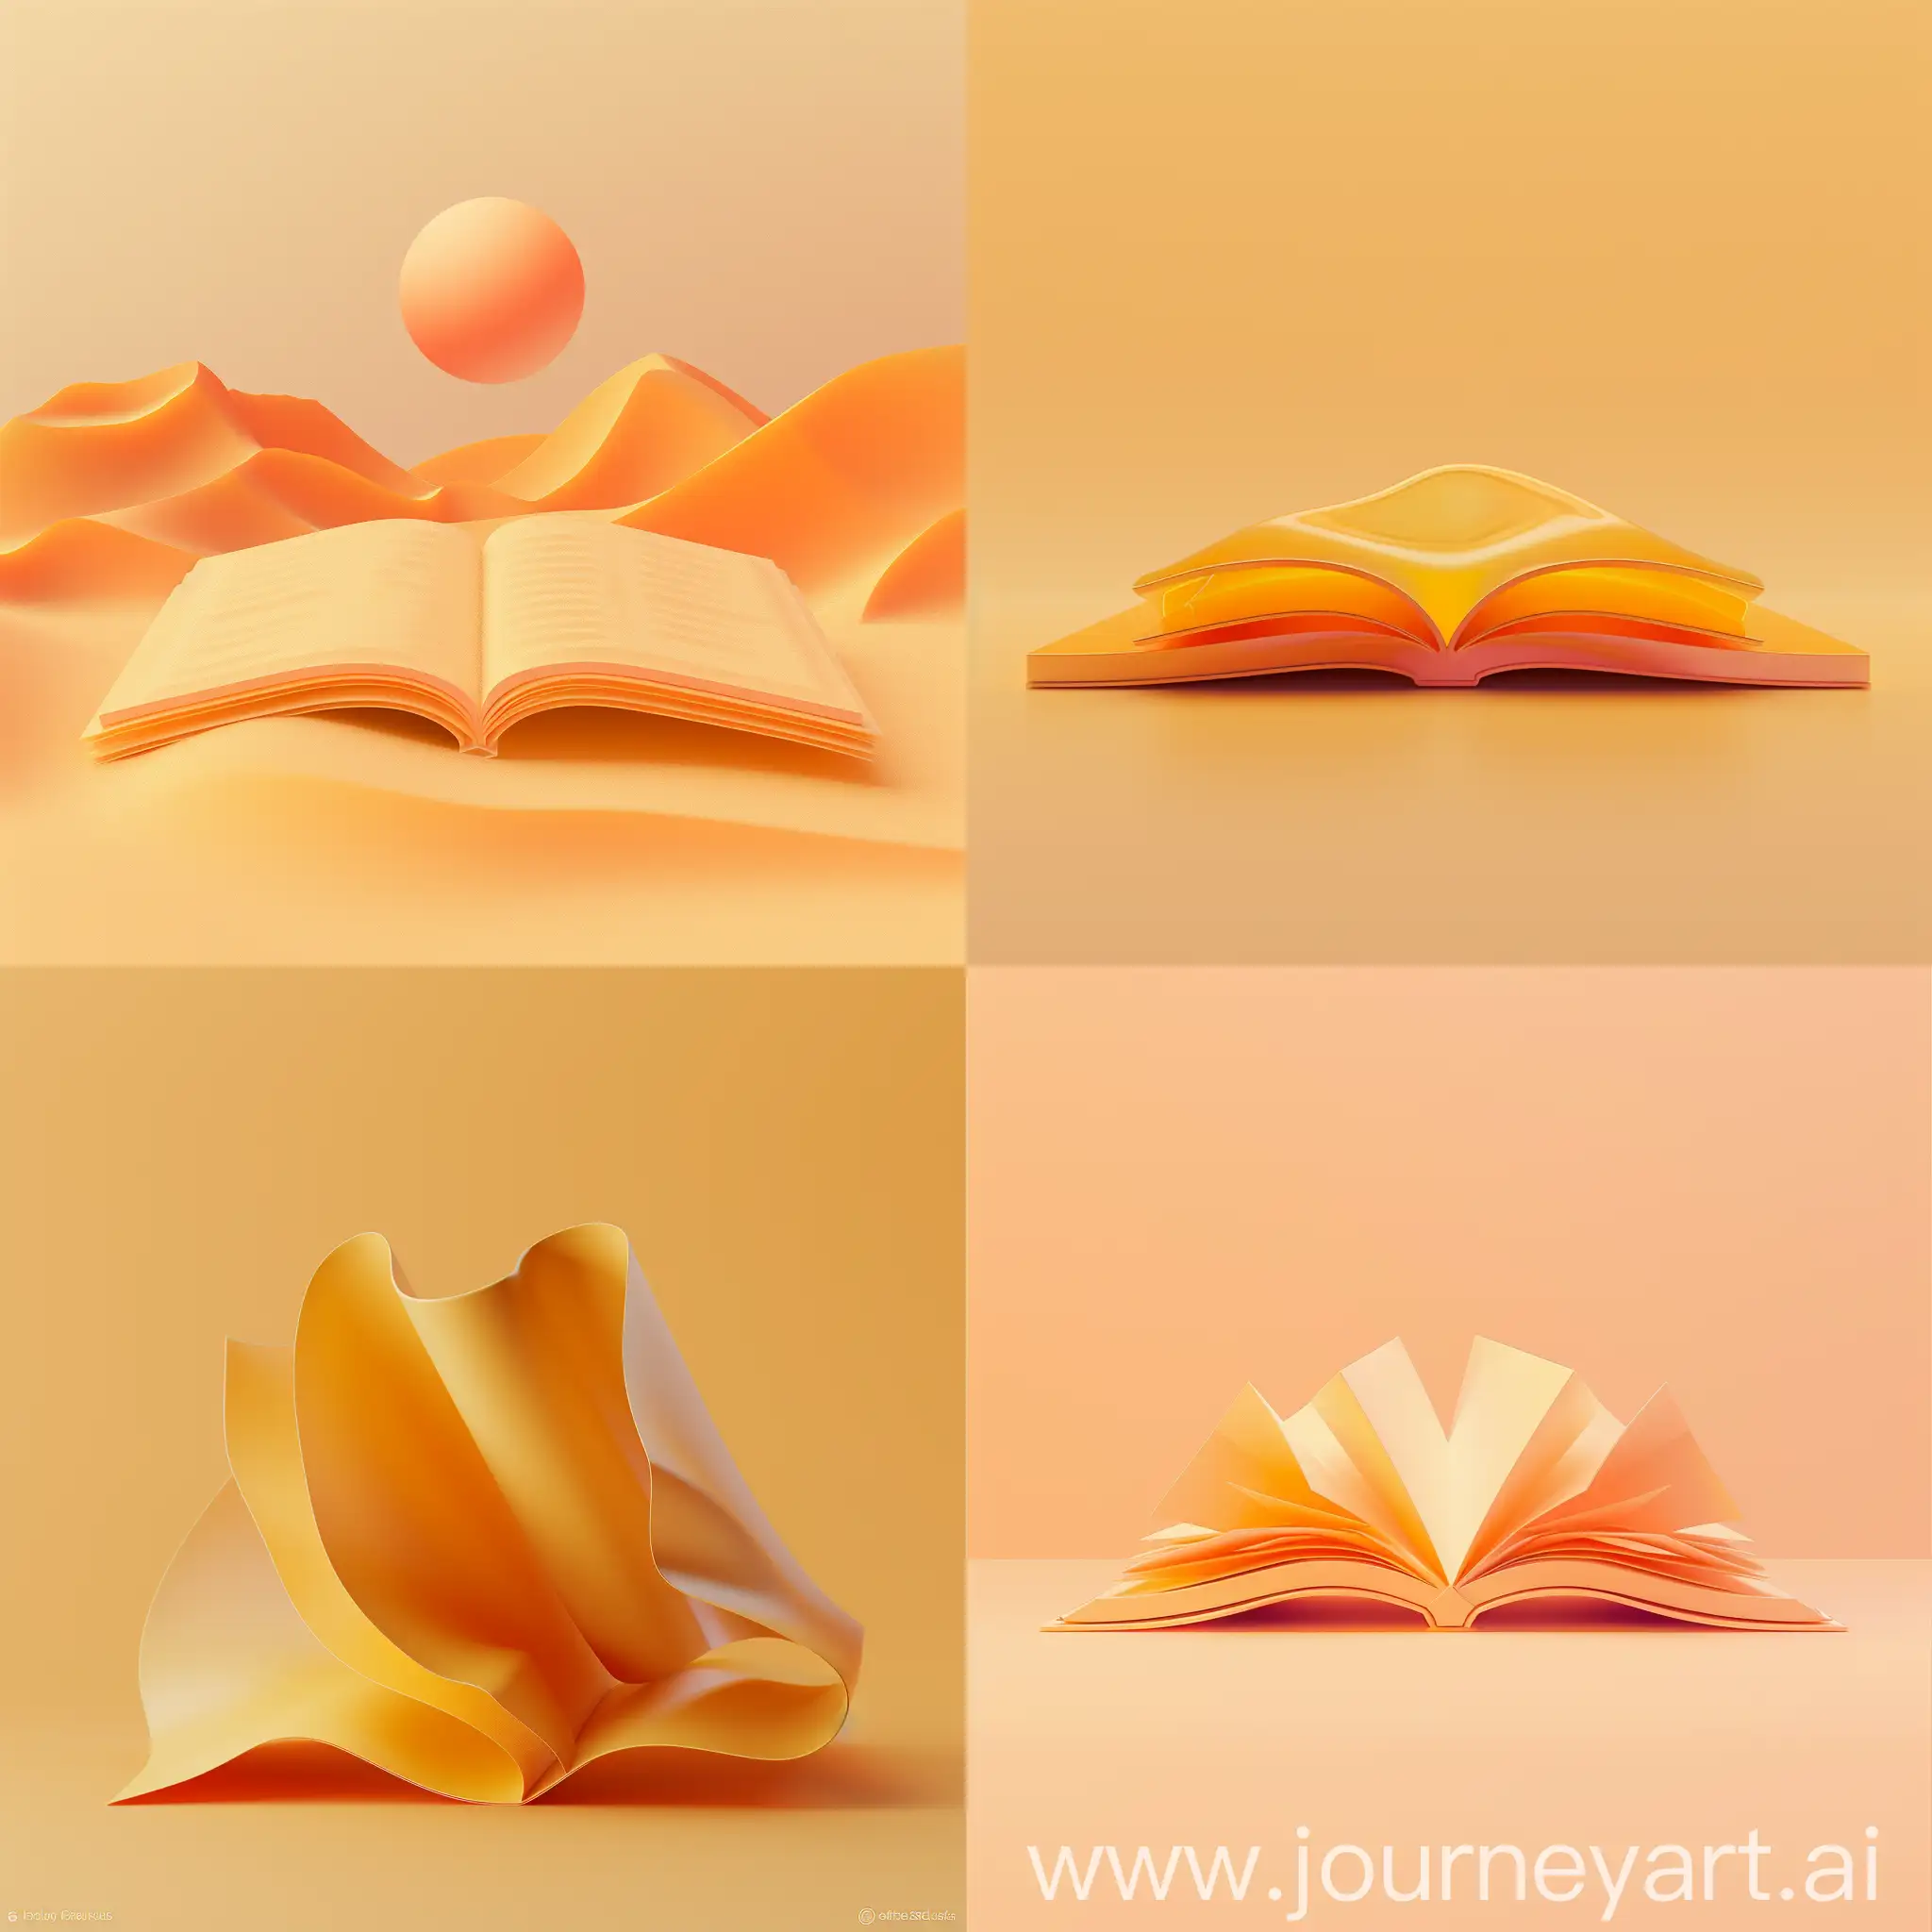 Minimalistic-3D-Illustration-of-an-Opened-Book-with-Soft-Lines-and-Gradient-Colors